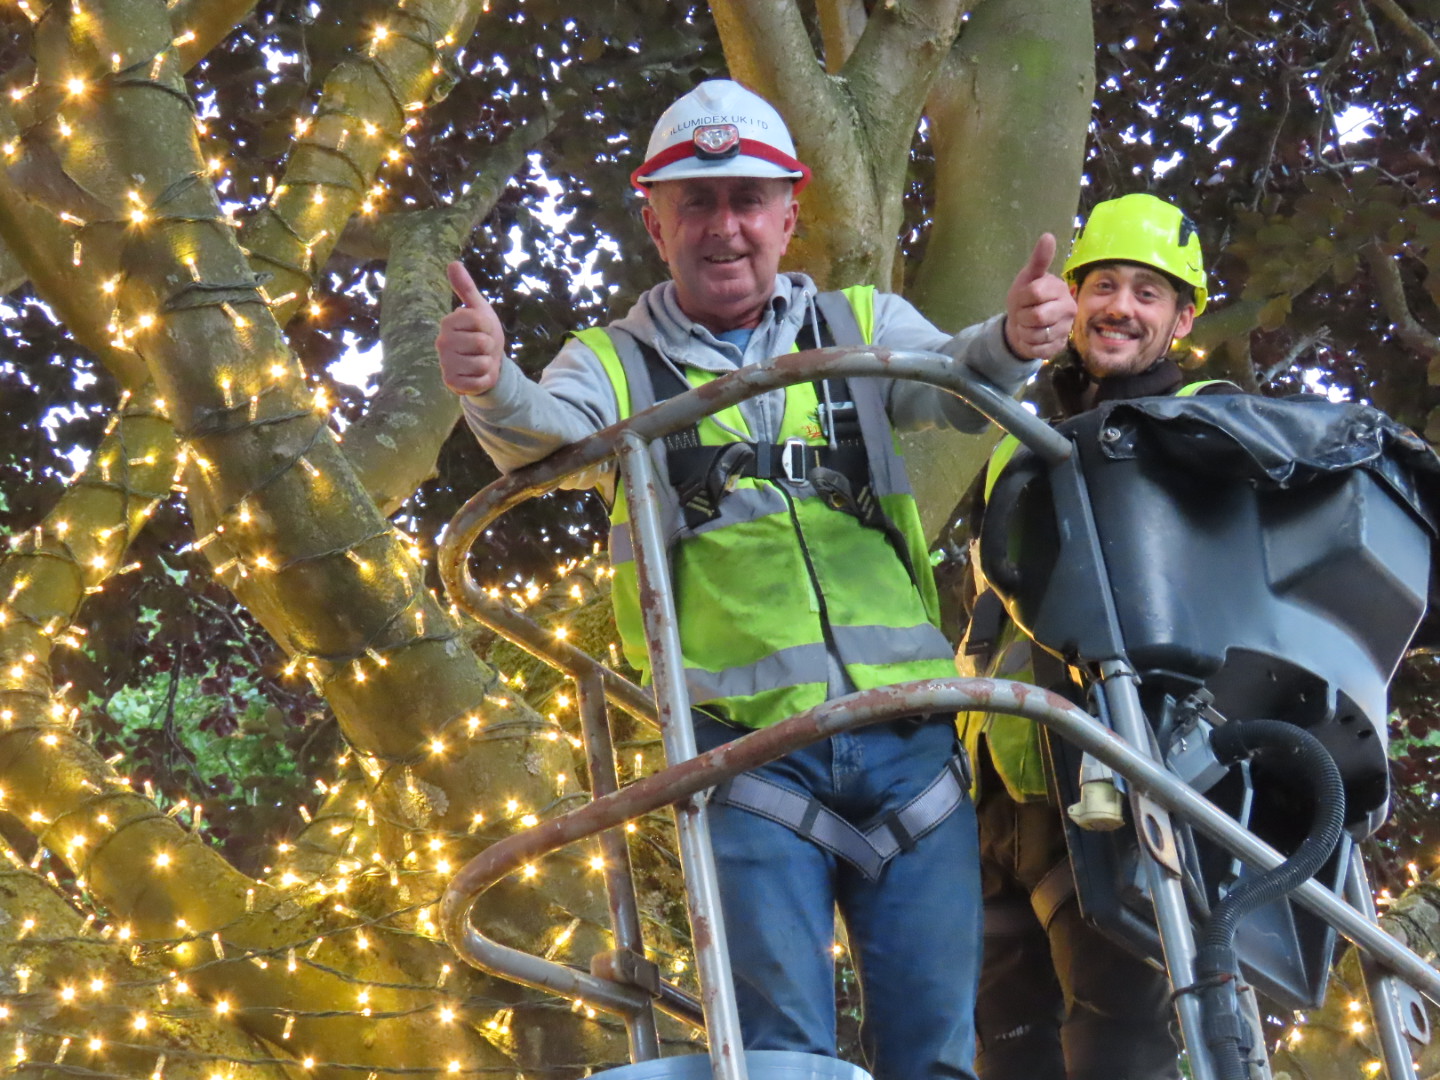 Ainsdale Village in Southport has been lit up with 70,000 new lights thanks to Ainsdale Civic Society and IllumiDex UK Ltd. Steve Clayton and Chris Ryan from IllumiDex celebrate completing the project. Photo by Andrew Brown Media